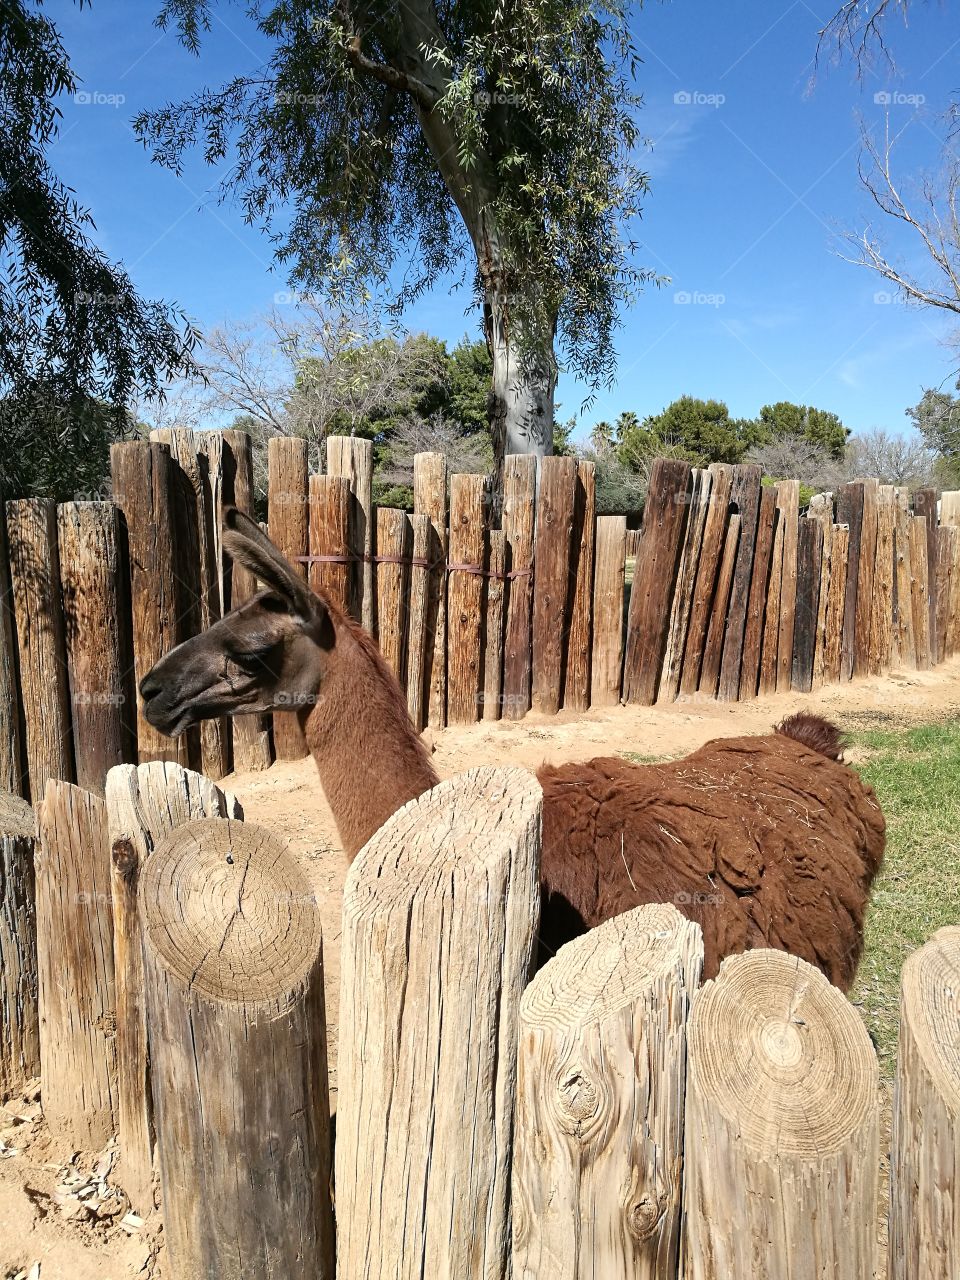 Llama with brown hair standing in the wooden stable with background of blue sky.